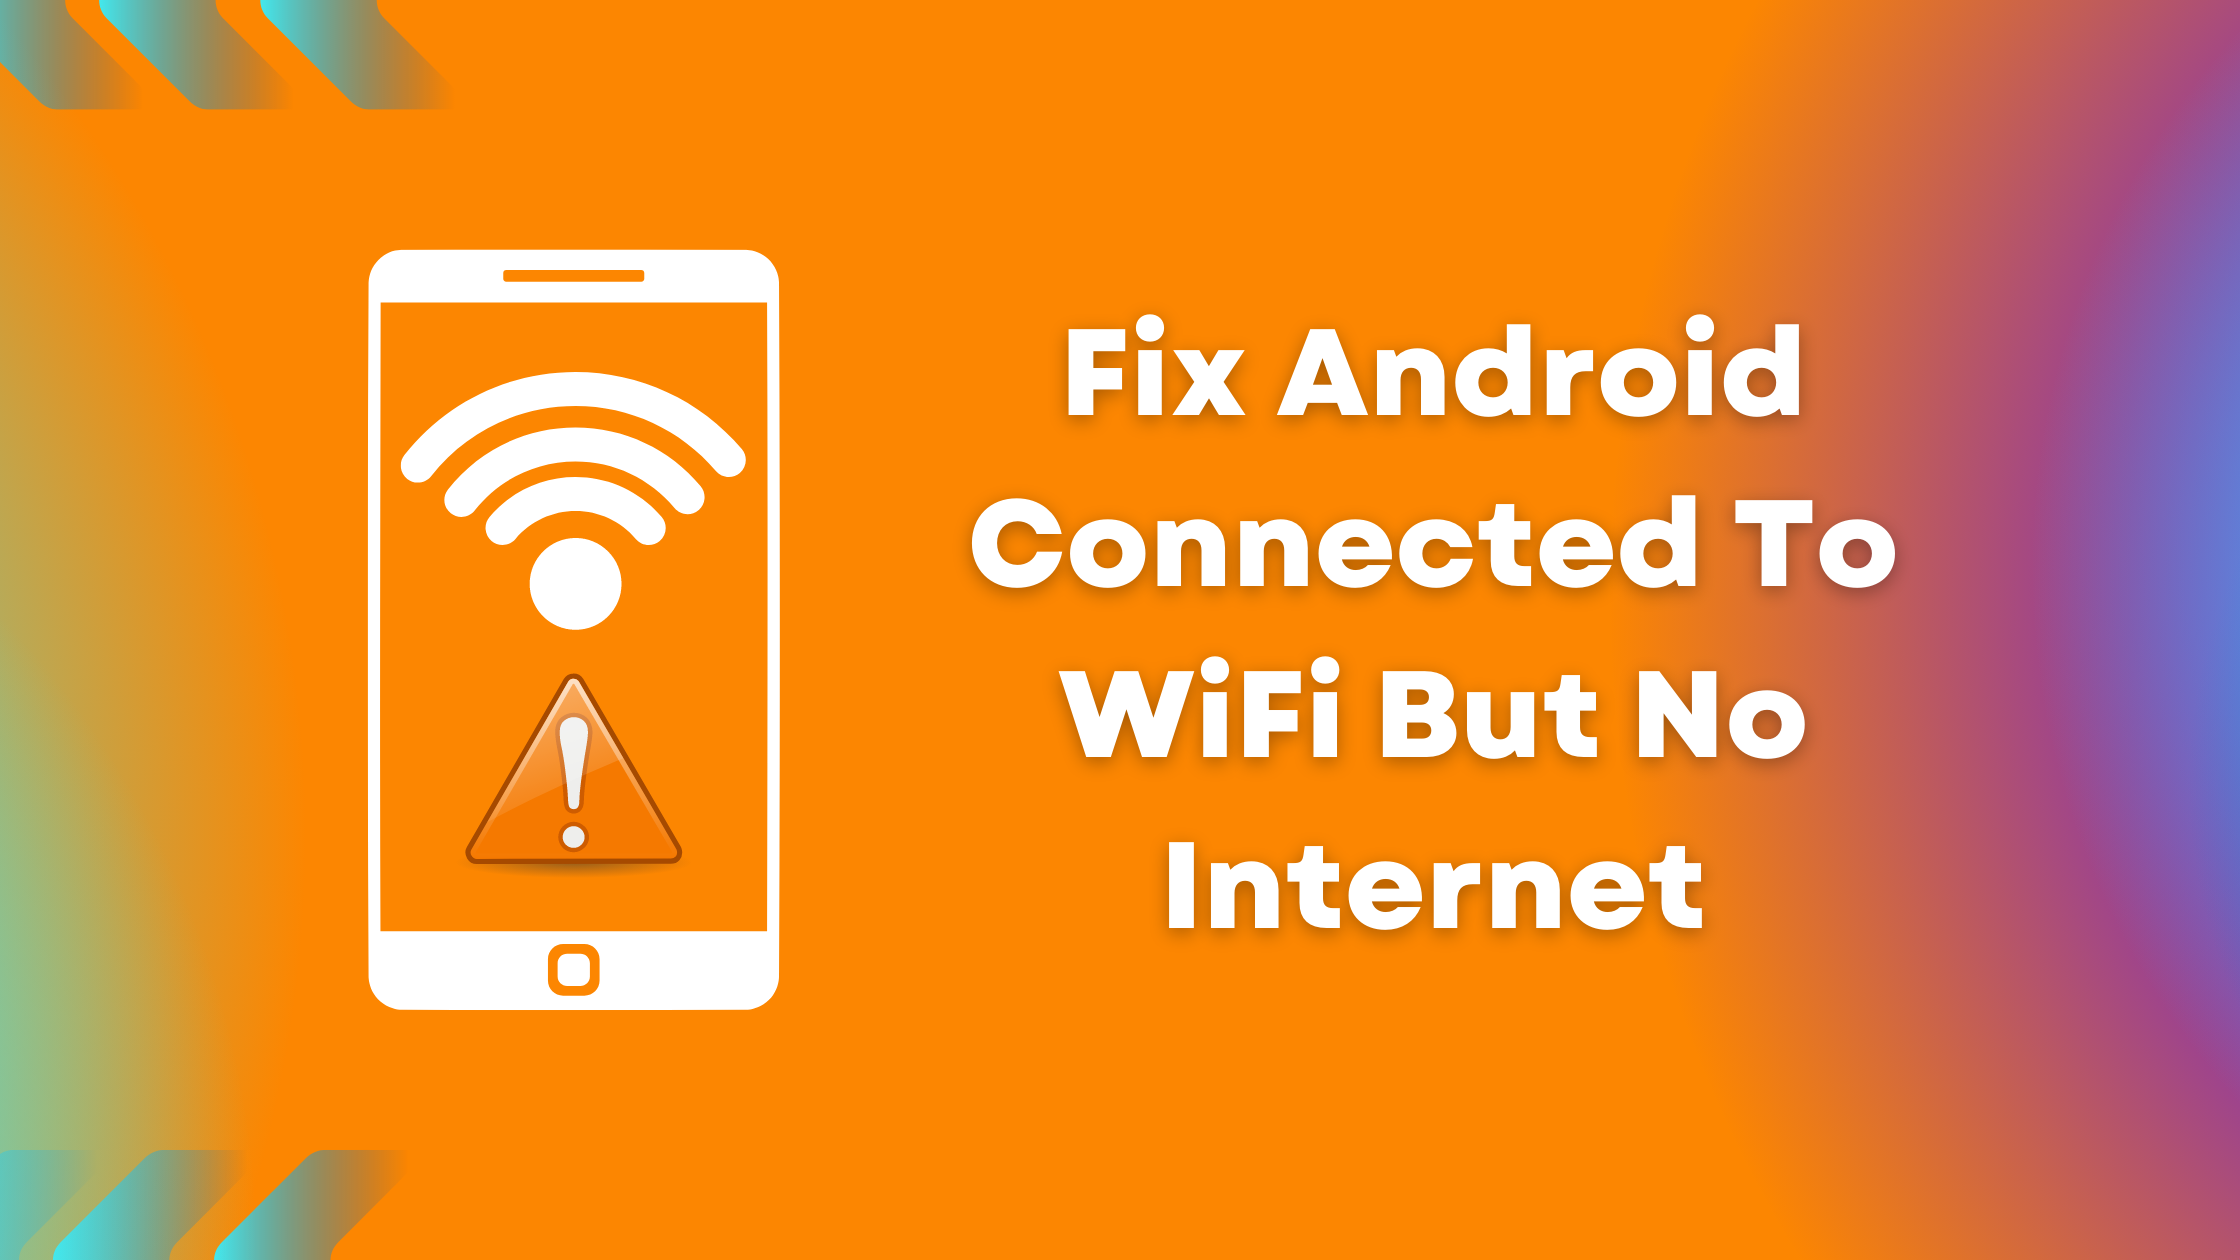 Fix Android Connected To WiFi But No Internet